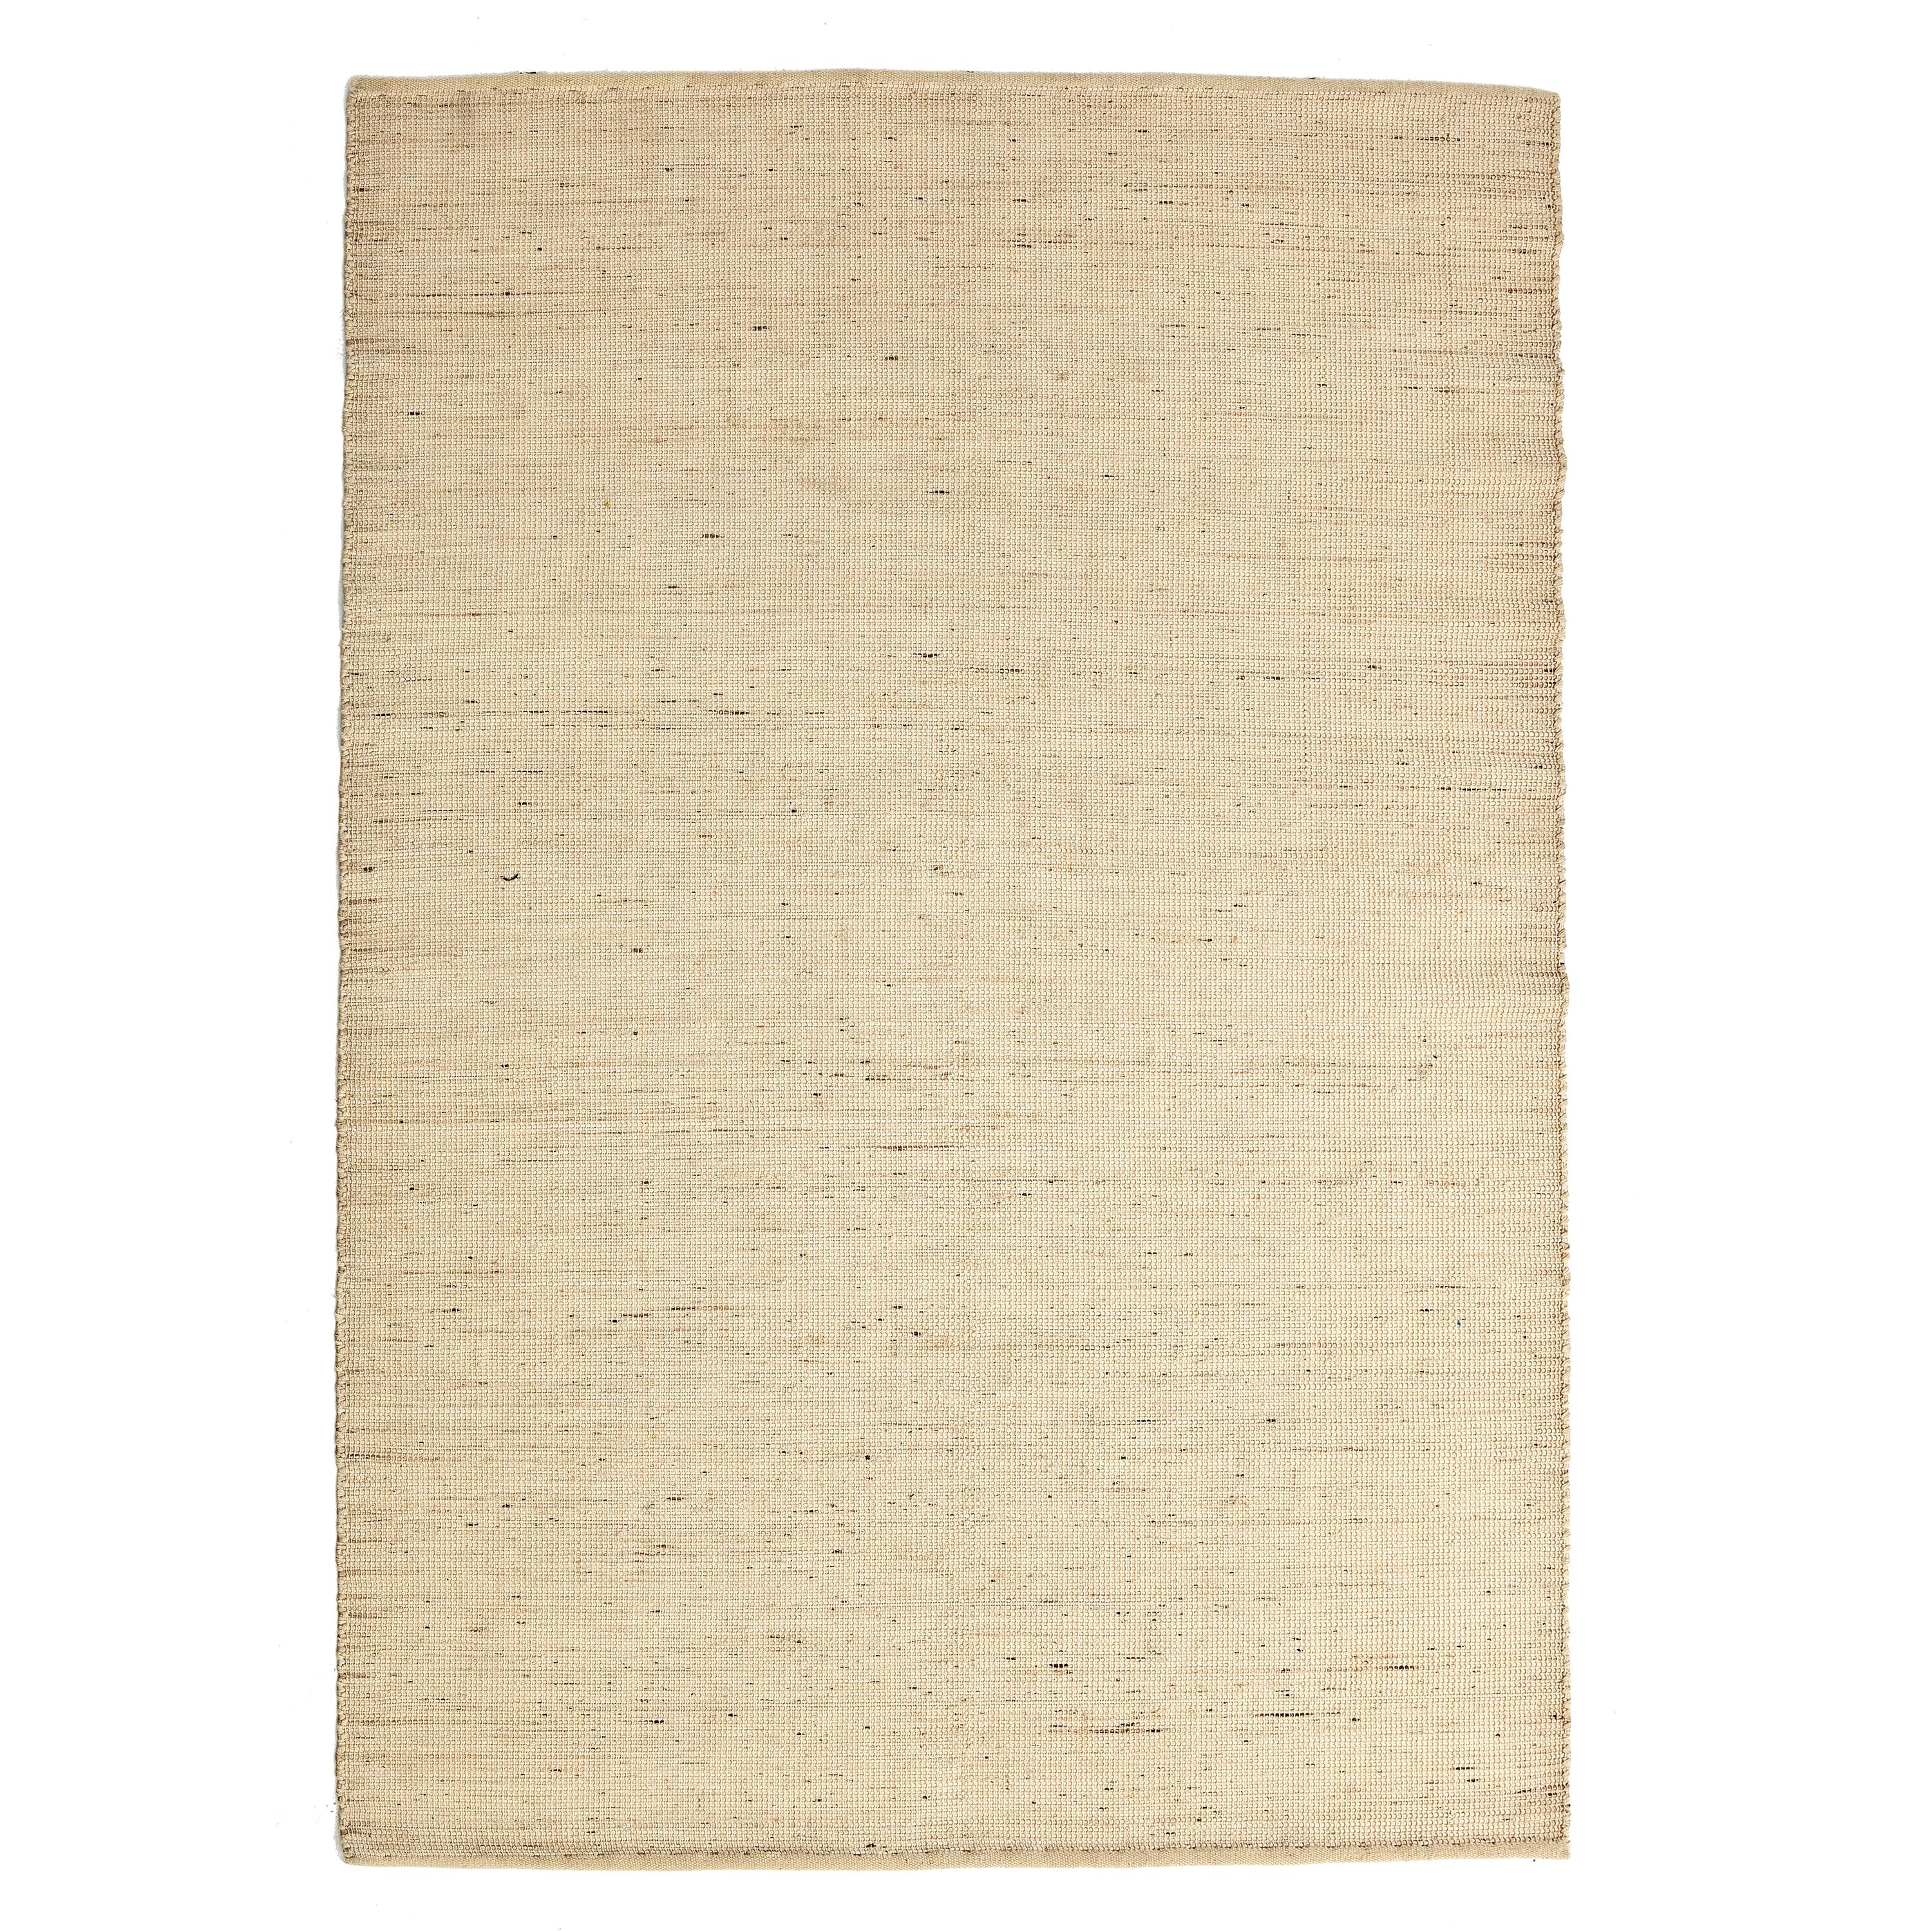 'Tatami' Rug by Ariadna Miquel and Nani Marquina for Nanimarquina For Sale 6